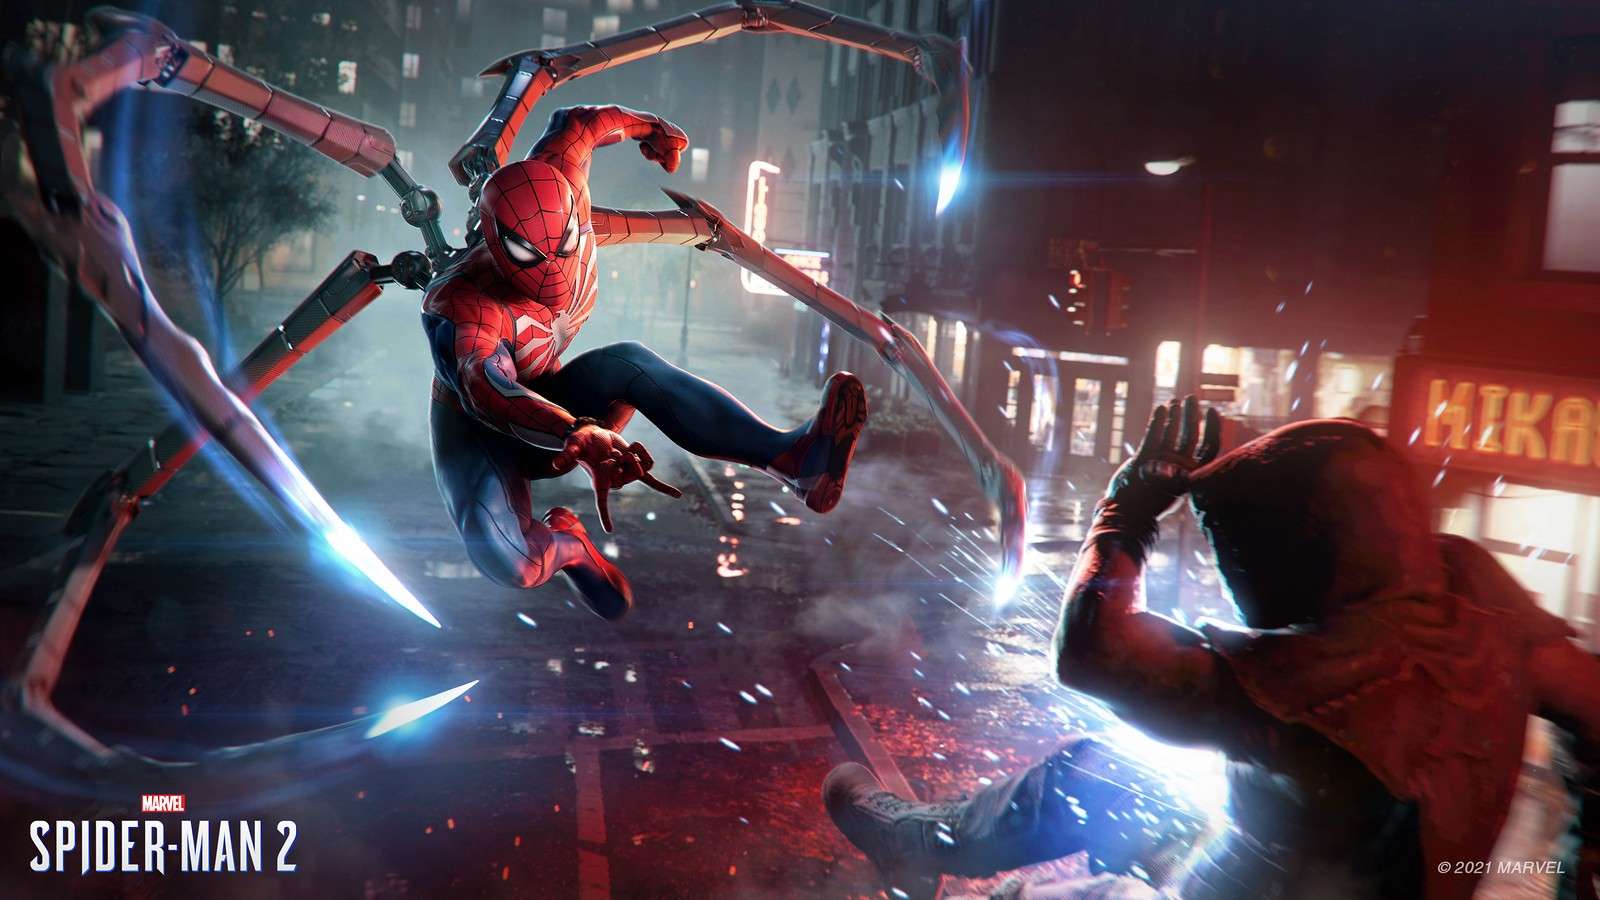 A promotional image from Marvel's Spider-Man 2 featuring Spider-Man in combat.